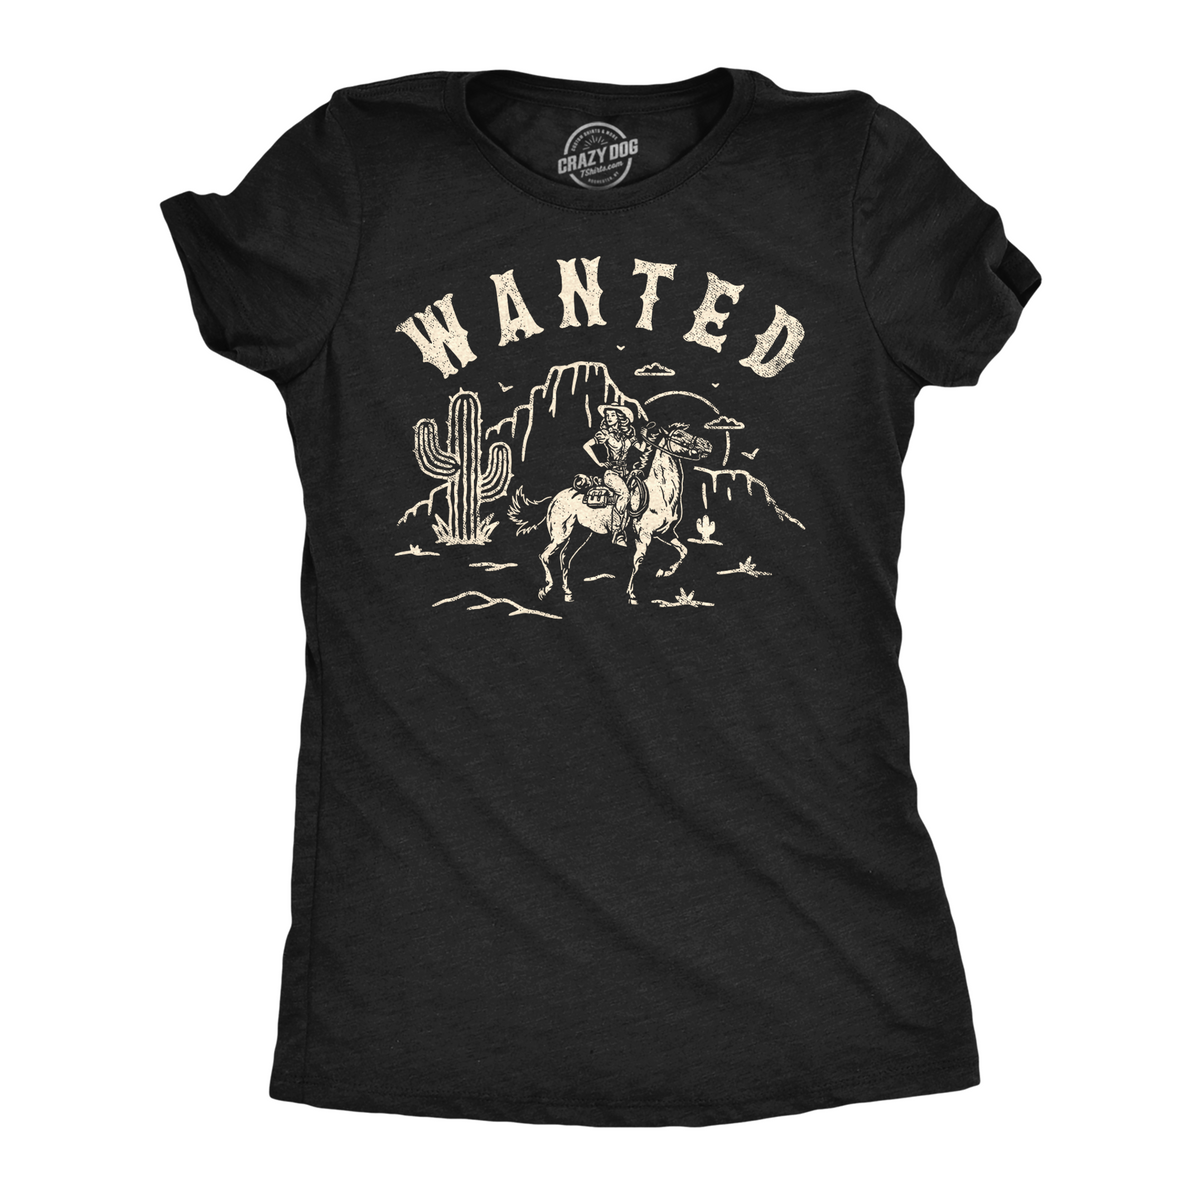 Funny Heather Black - Wanted Retro Cowgirl Wanted Retro Cowgirl Womens T Shirt Nerdy Retro Tee